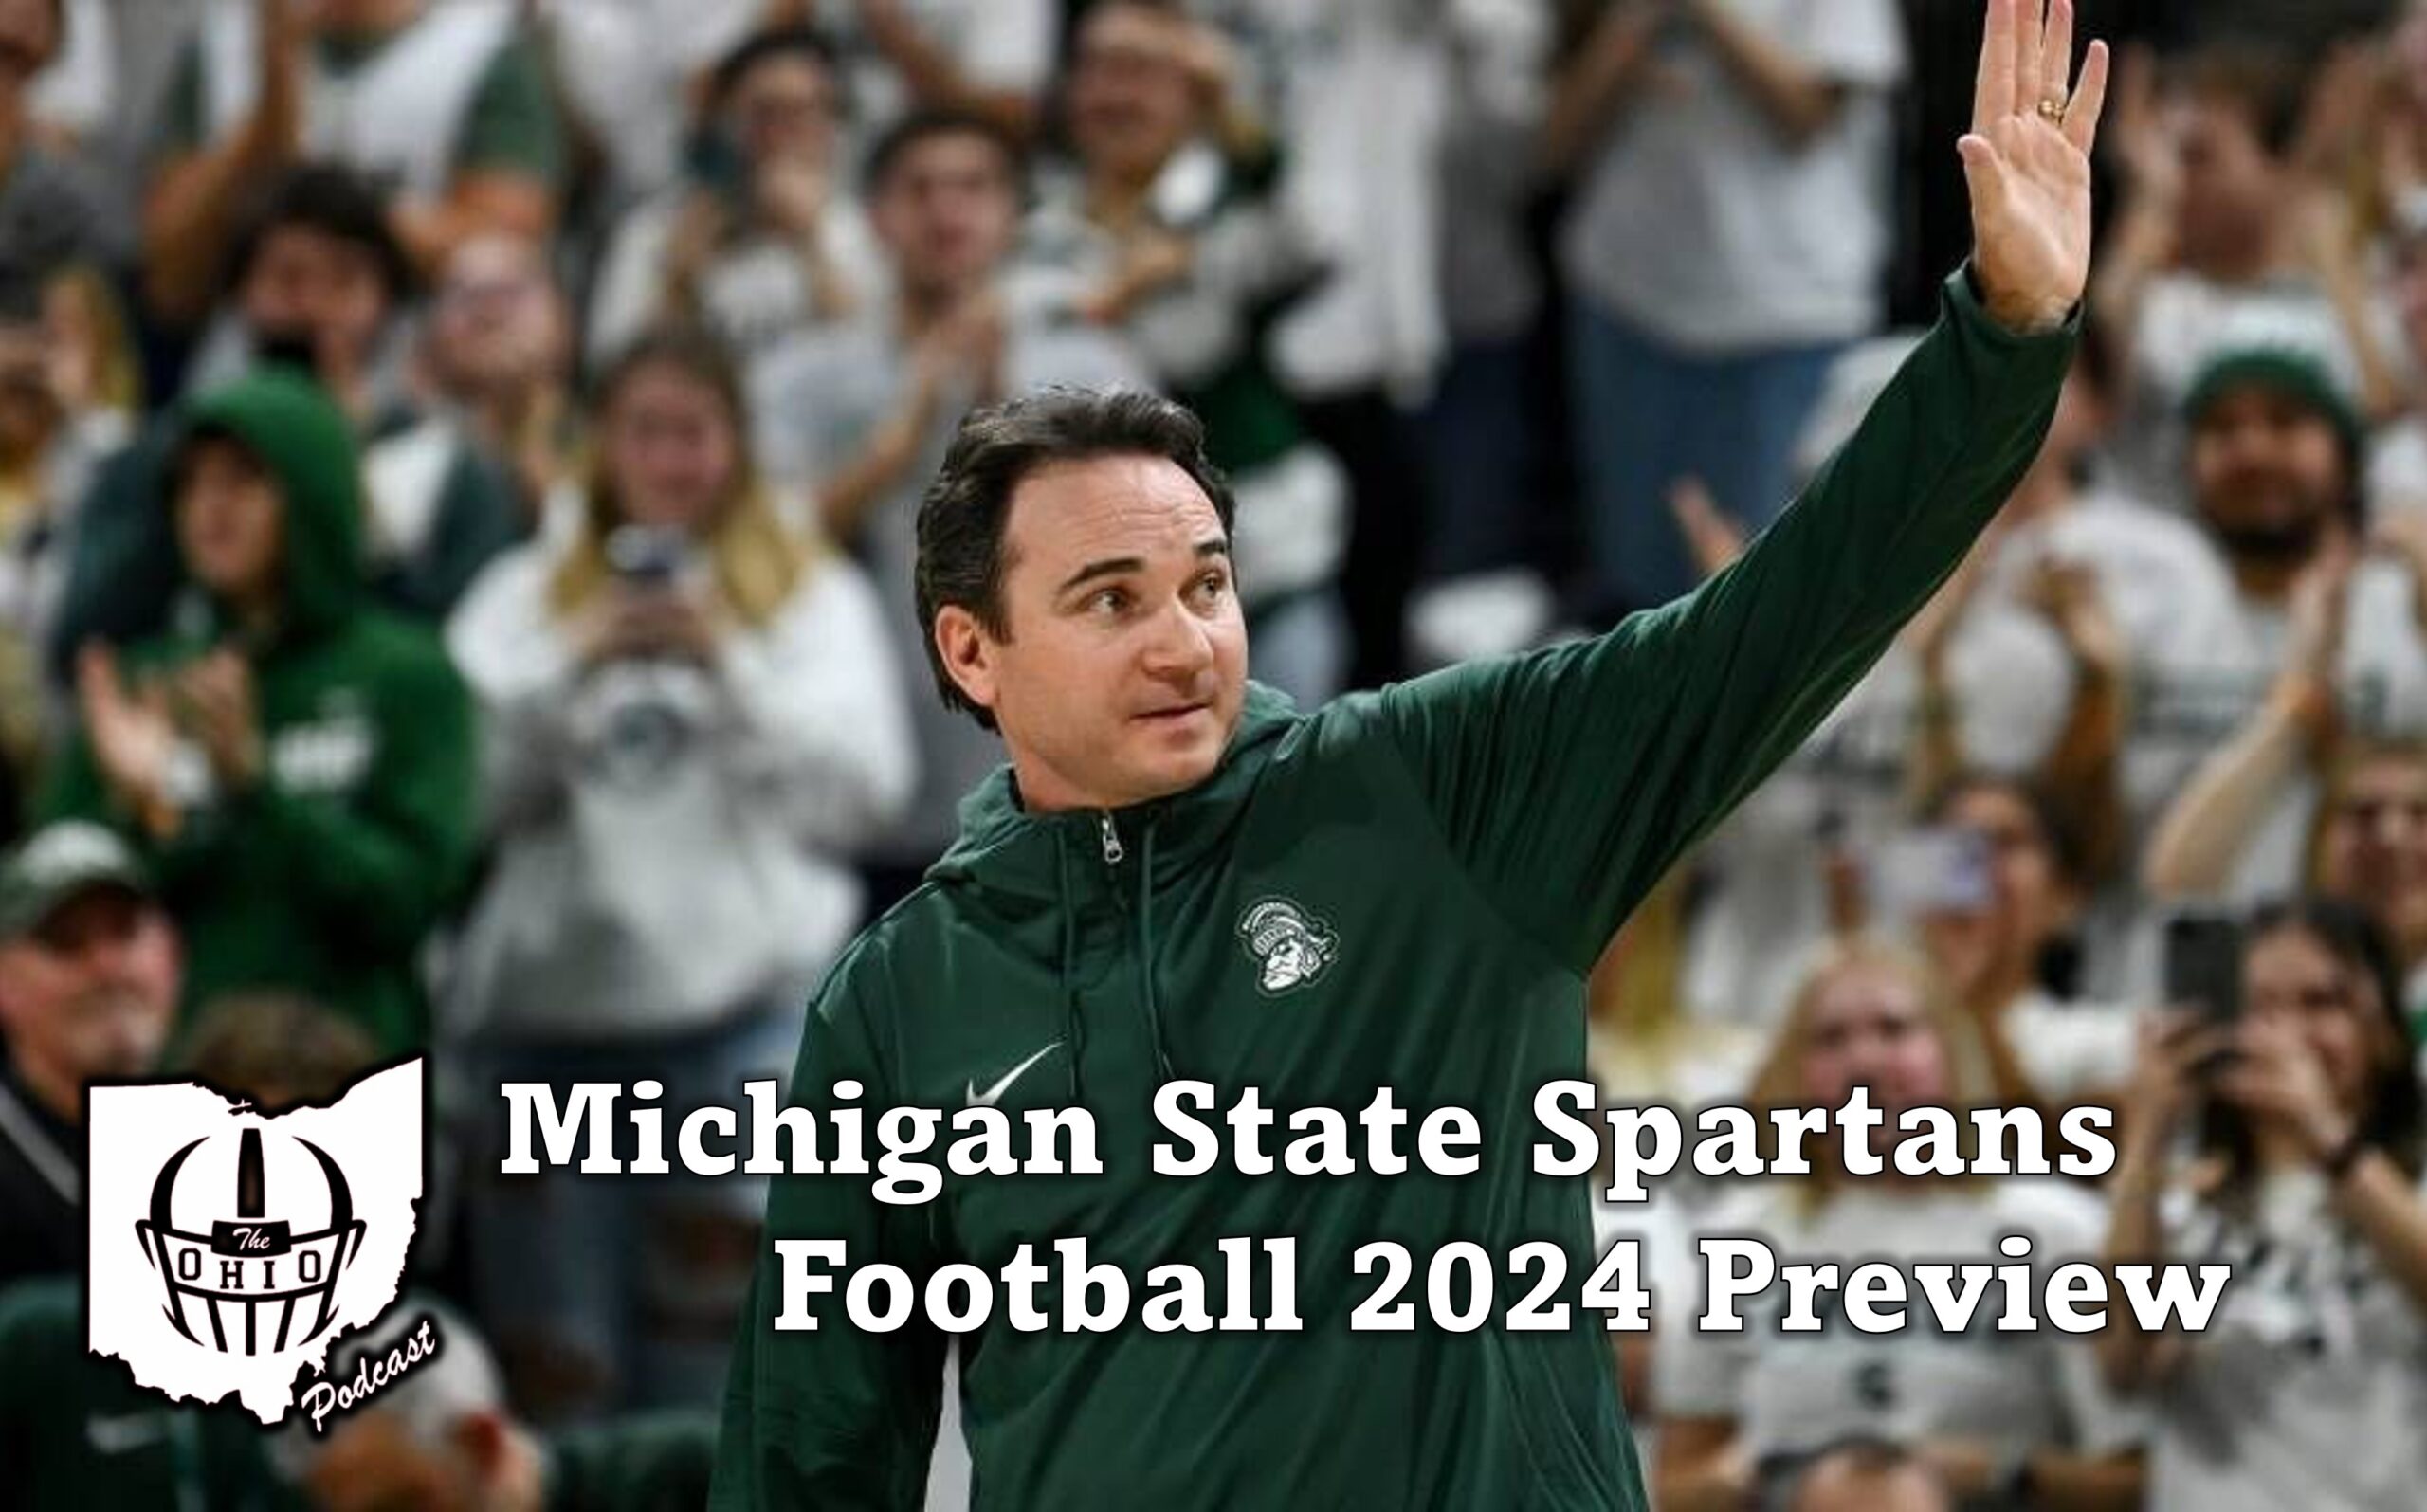 Michigan State Spartans Football 2024 Preview